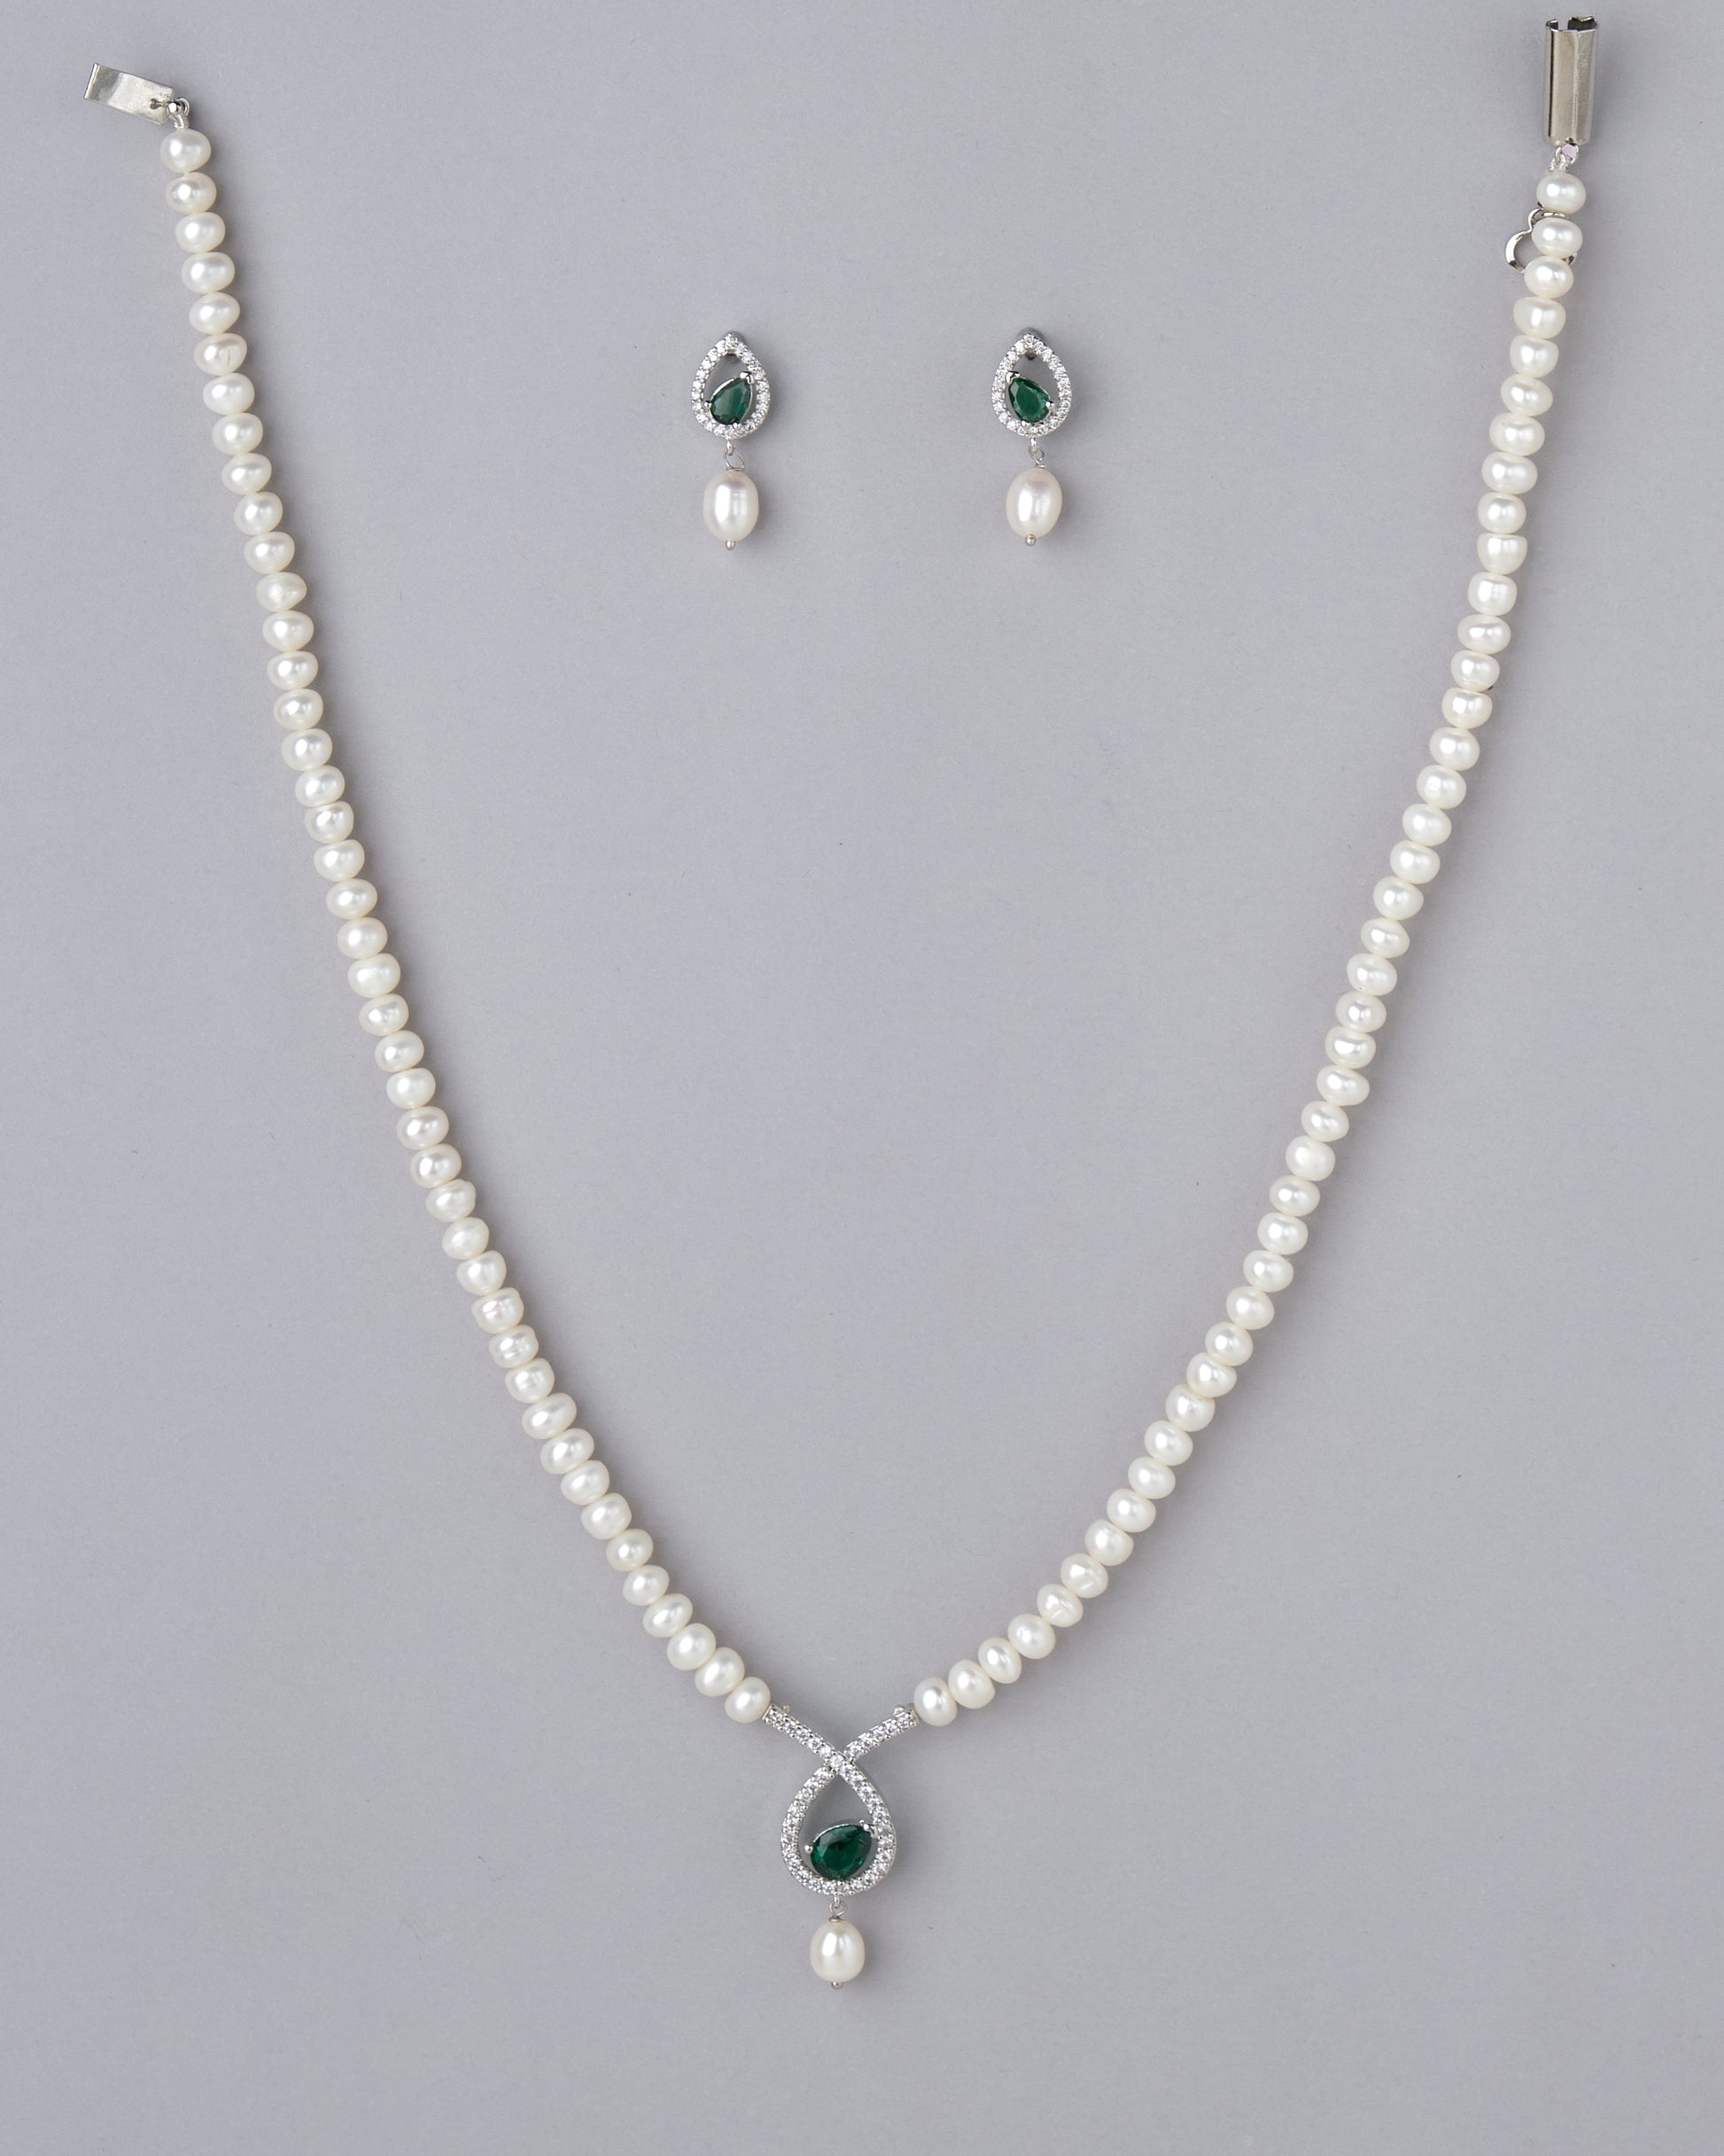 An Lyrical Tear Drop Pearl necklace set by Chandrani Pearls.